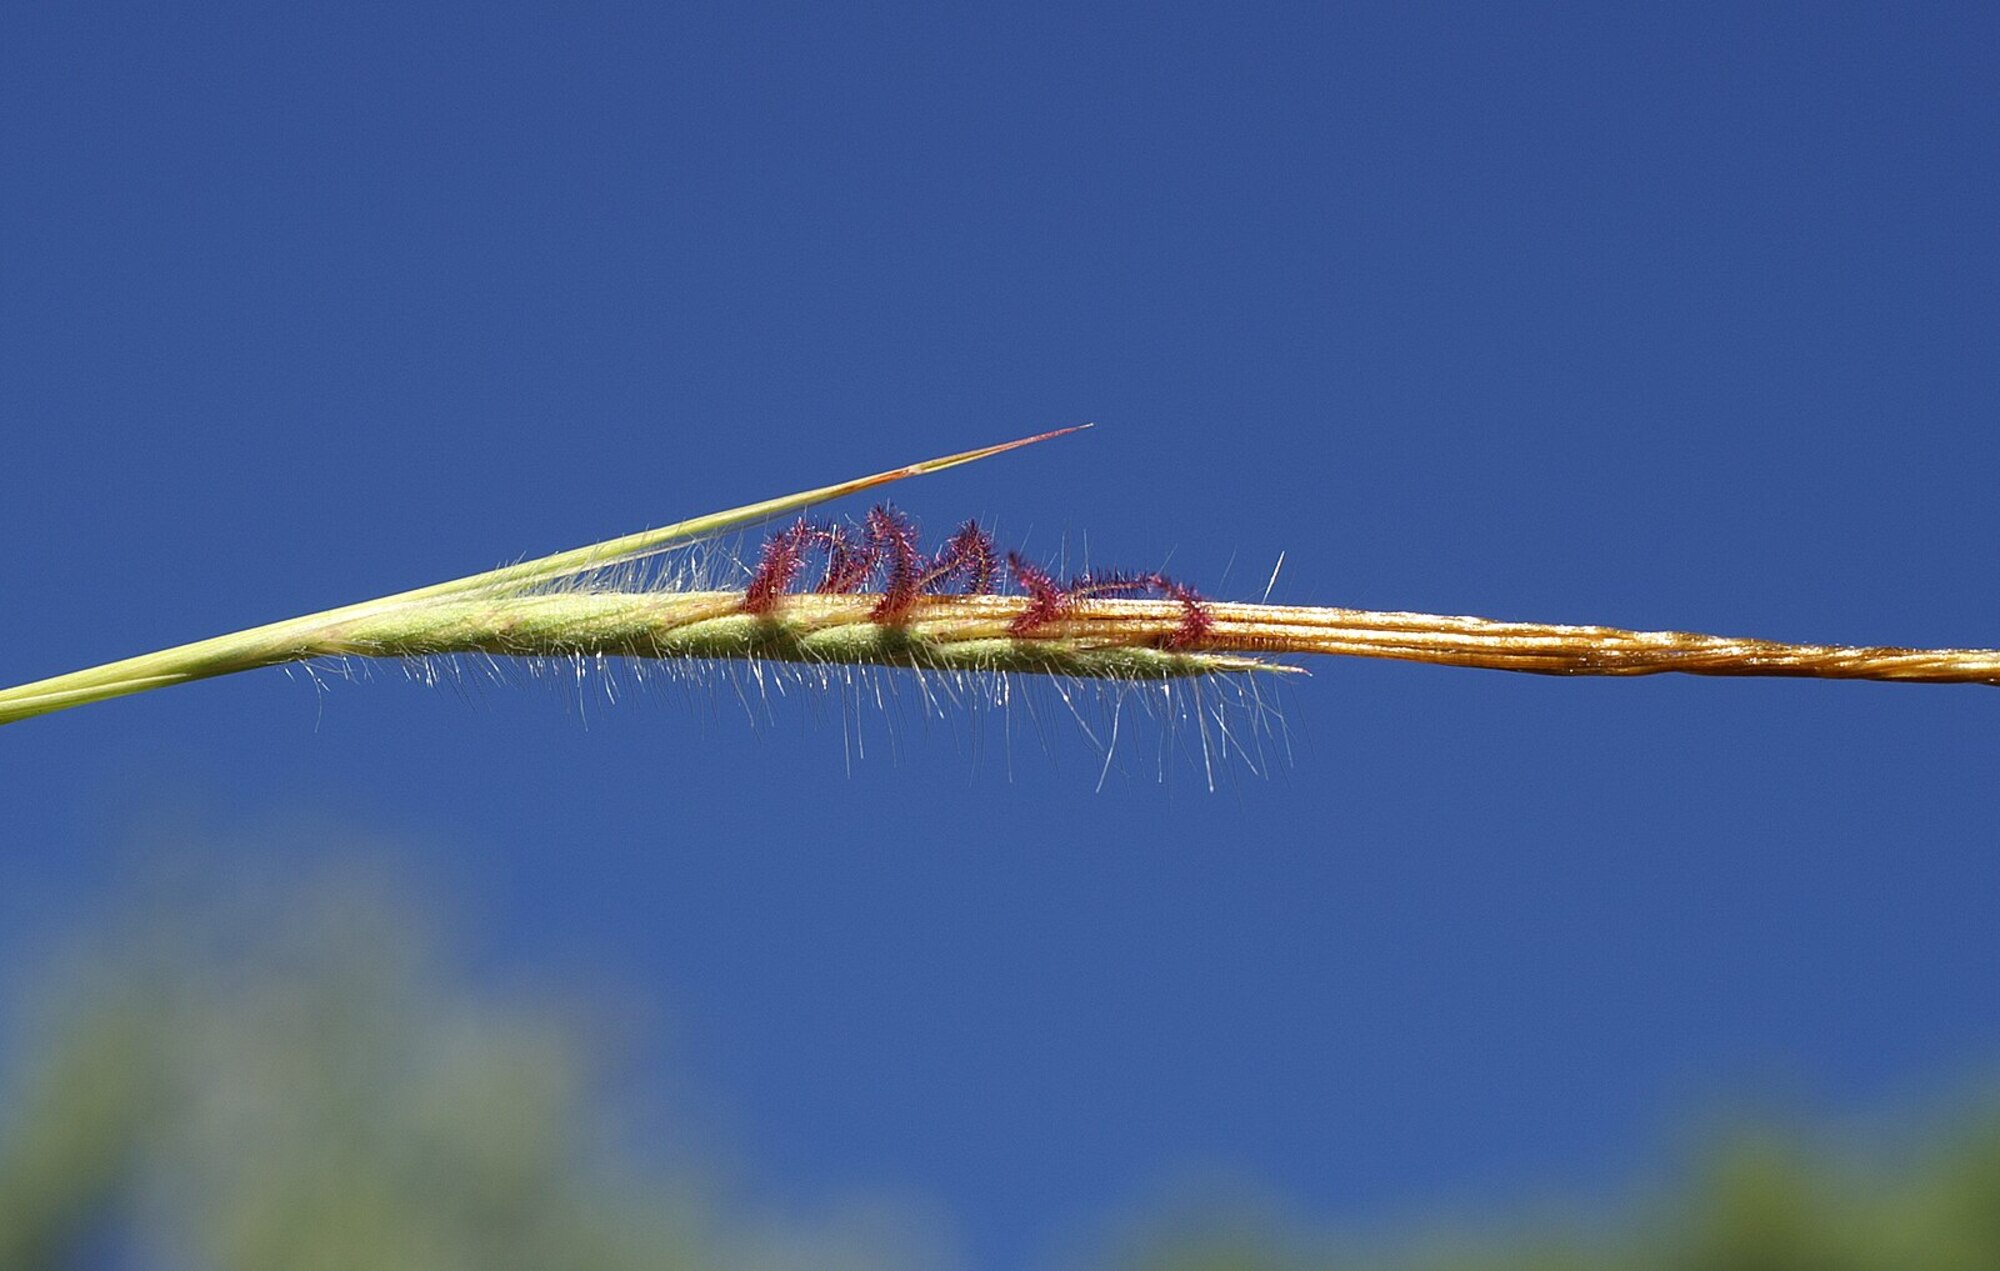 Photograph of a young tanglehead inflorescence. The inflorescence is oriented horizontally with its tip toward the right, showing brown, twisted awns. Pairs of stigmas are protruding from the base of the inflorescence. The stigmas are feathery and red.